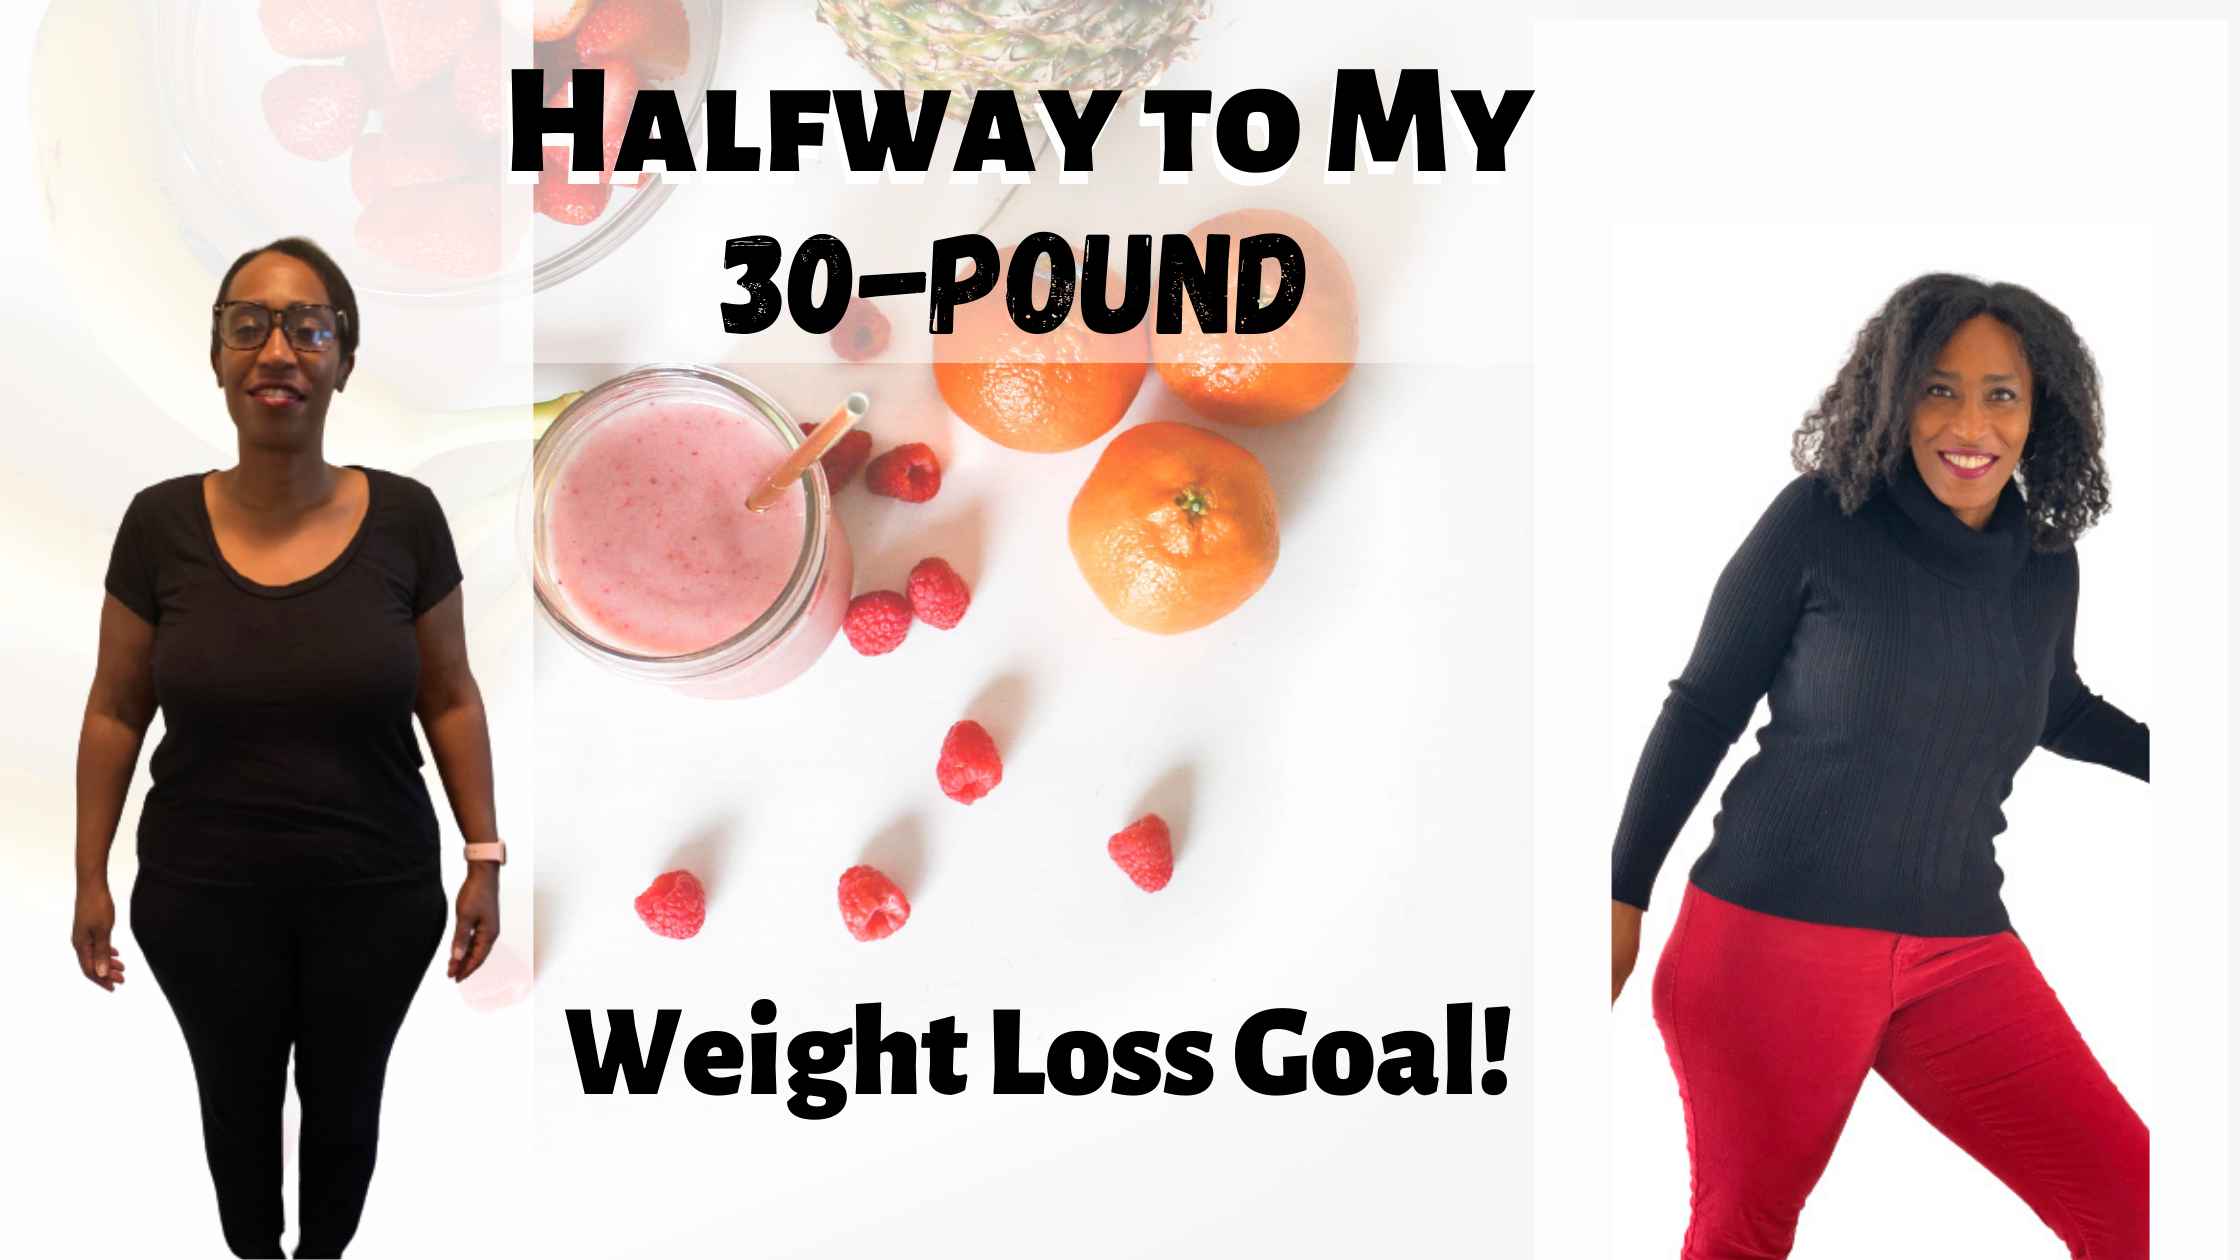 Halfway To MY 30-Pound Weight Loss Goal!